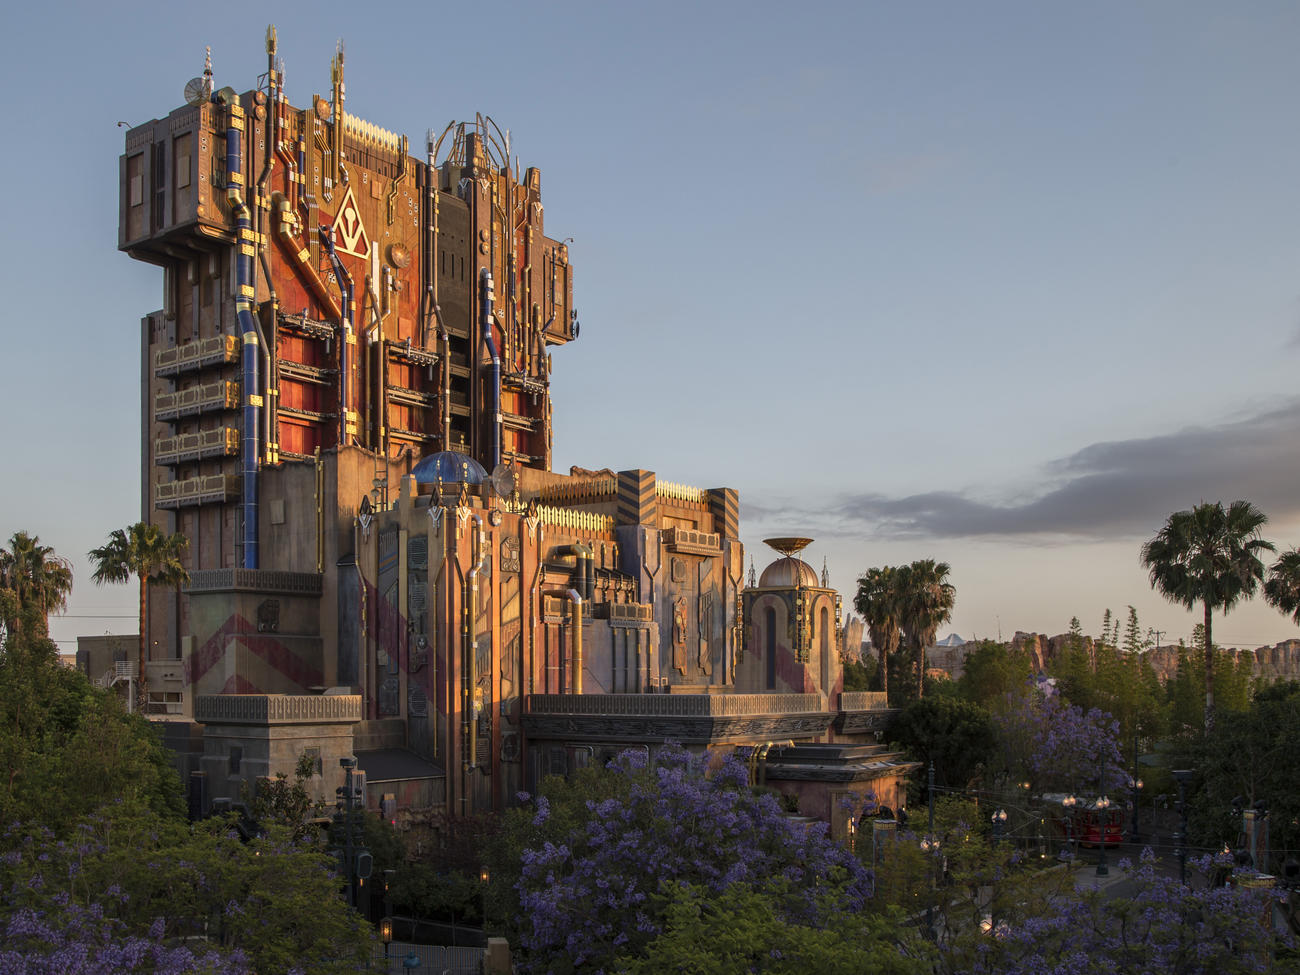 Disneyland Secures Permits for the Next Expansion: Marvel Land